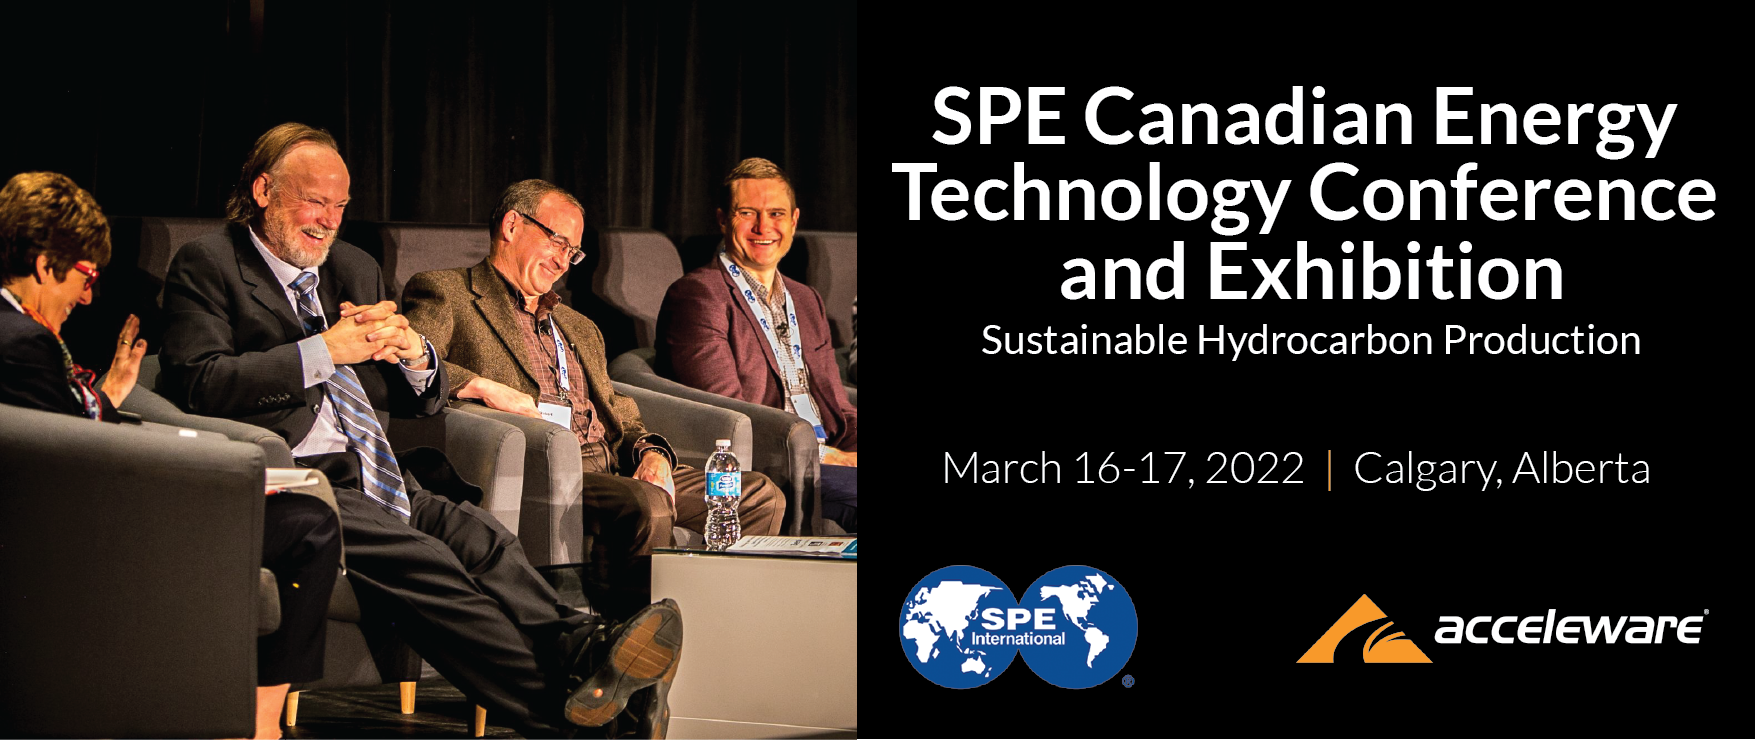 SPE Canadian Energy Technology Conference and Exhibition